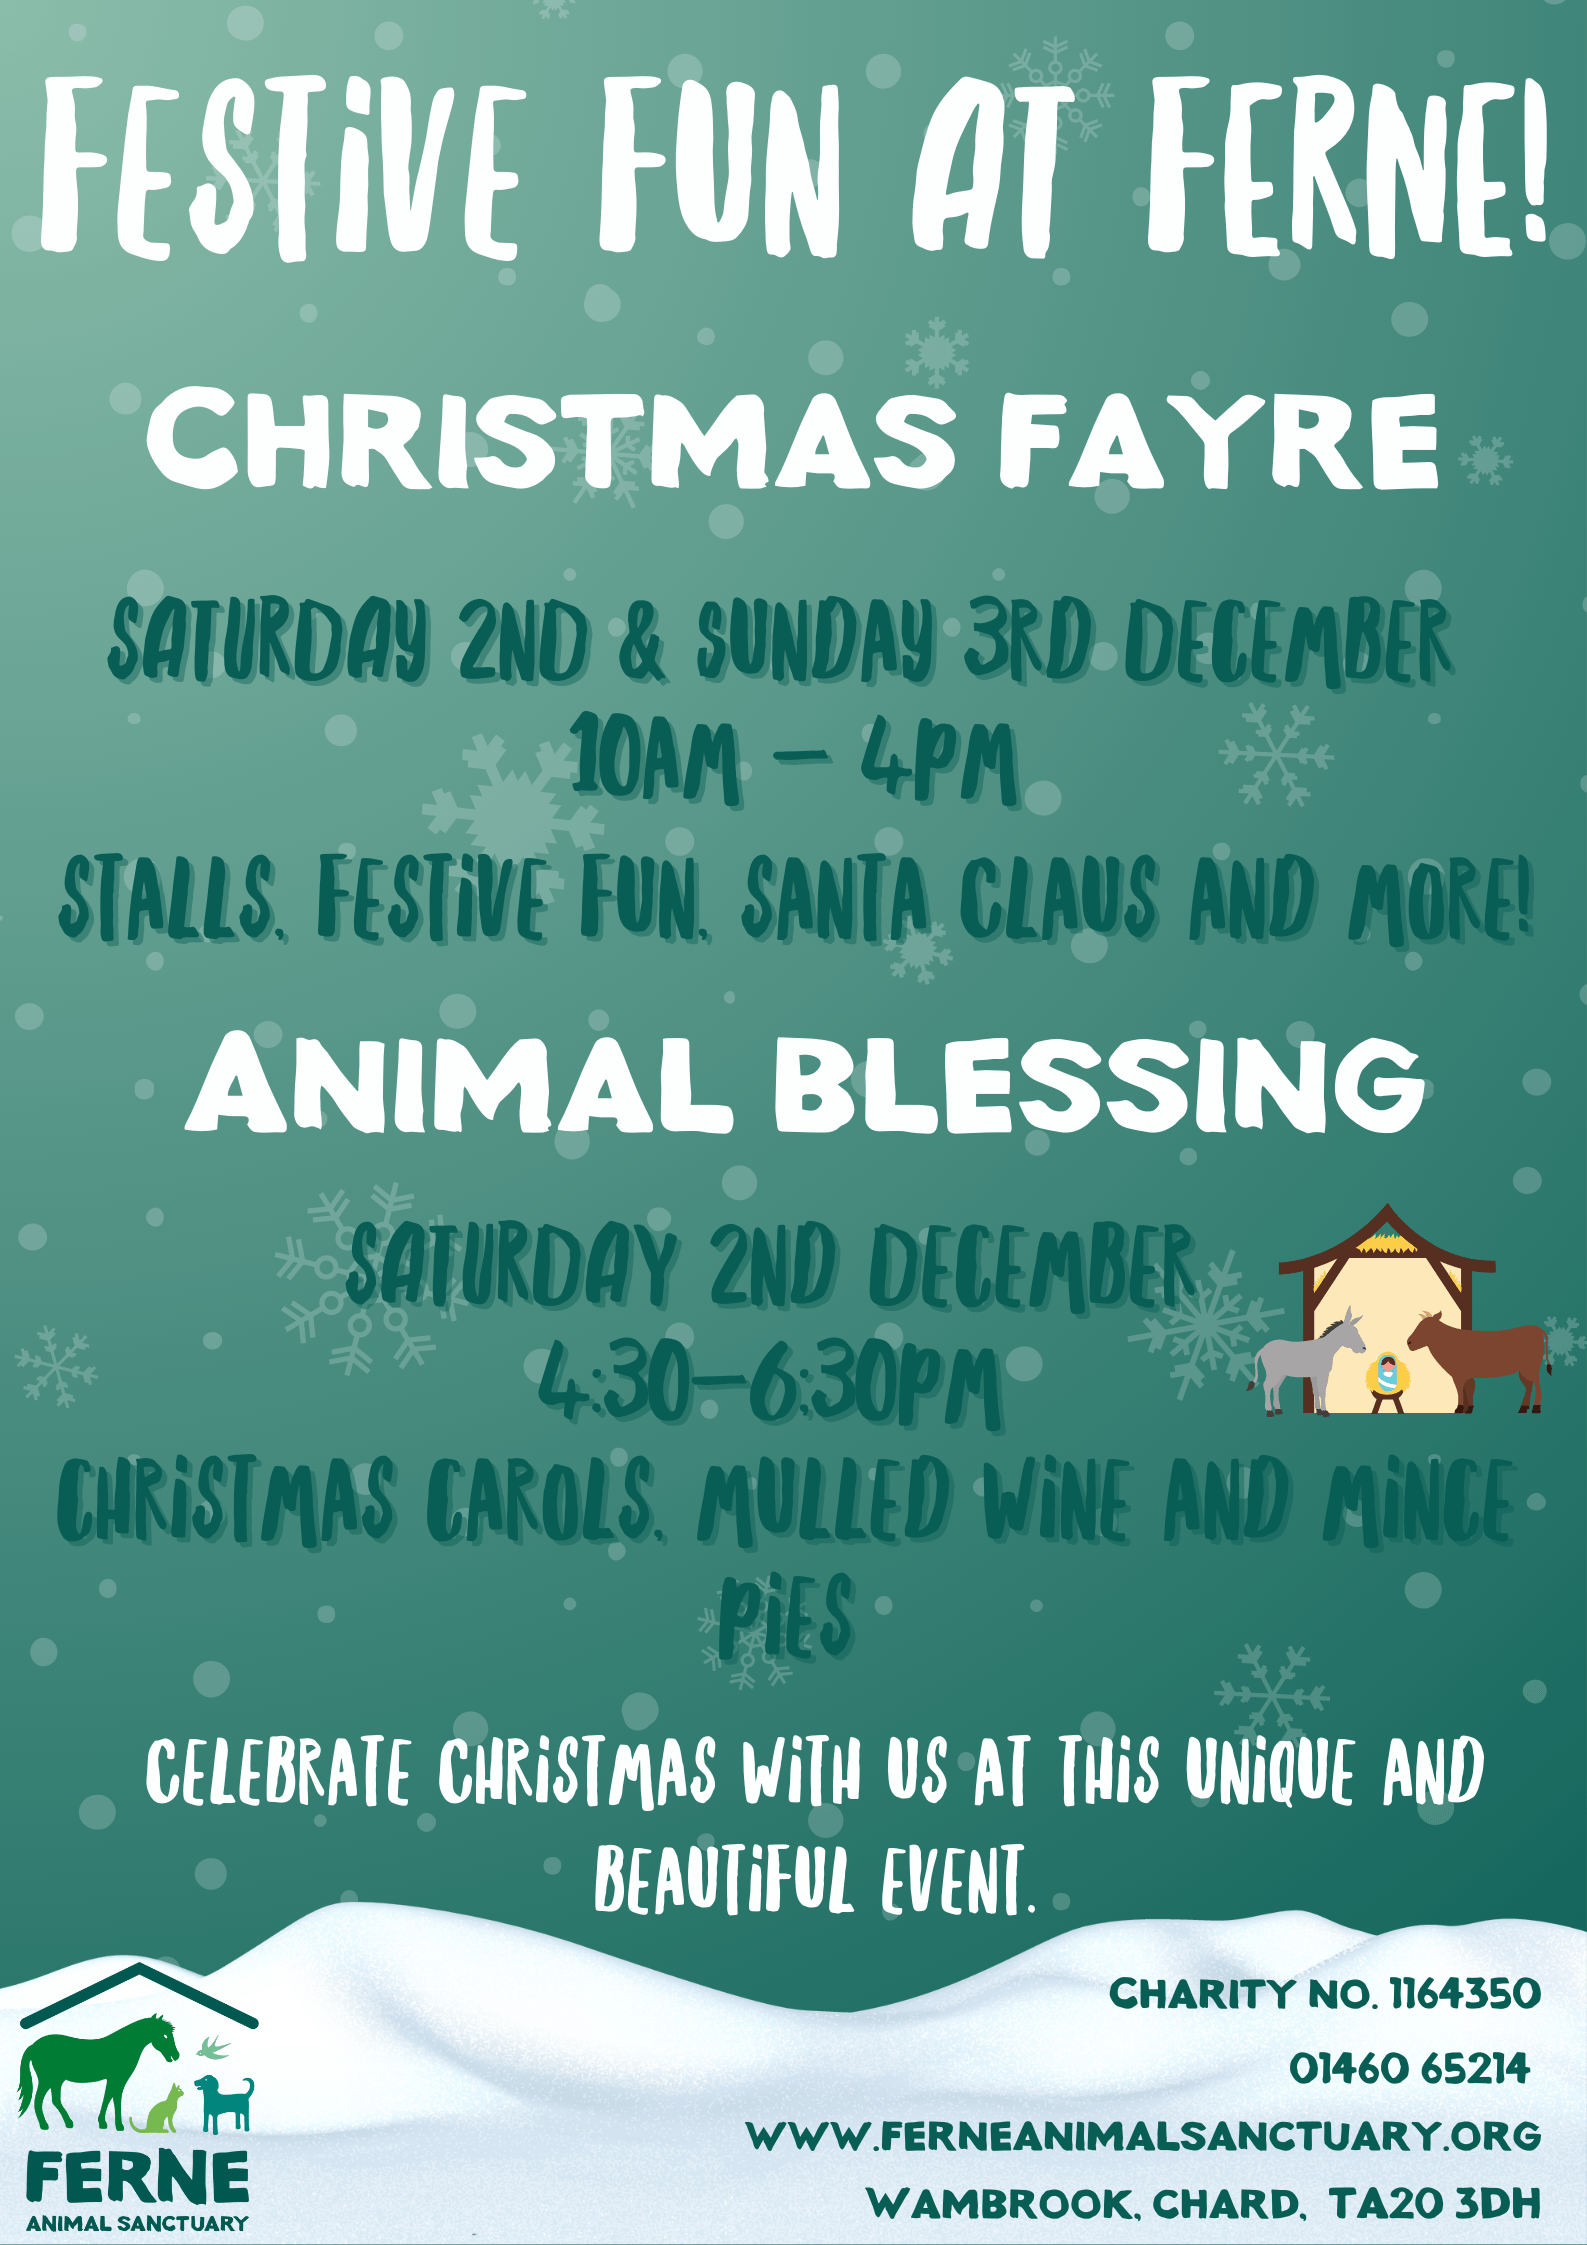 Christmas Fayre and Animal Blessing